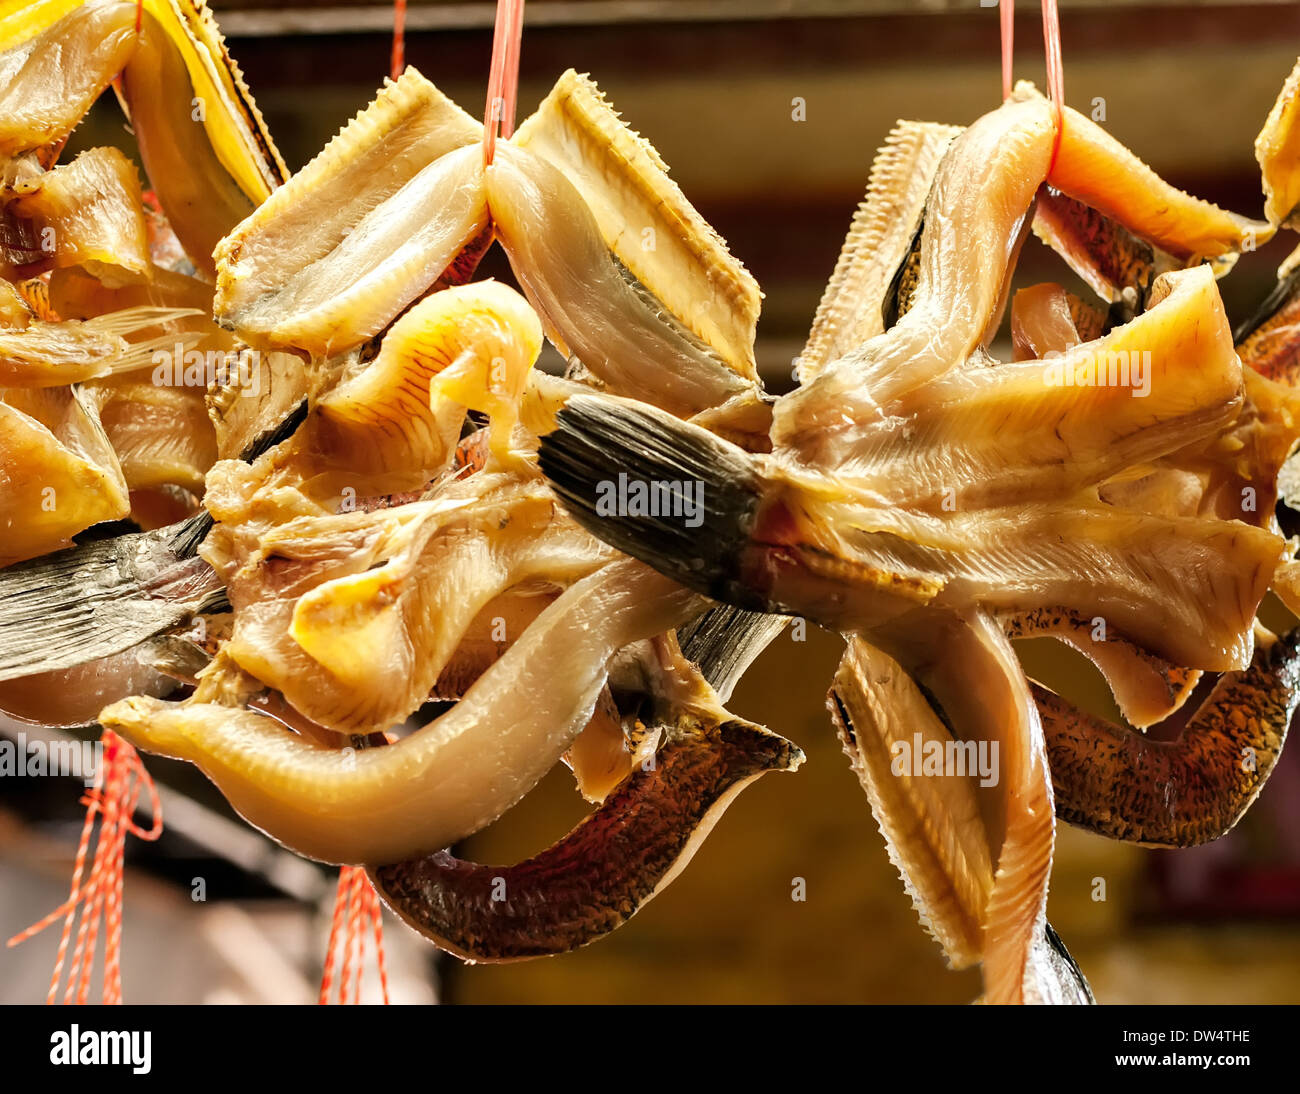 Dried fish for sale hanging at asian food market Stock Photo